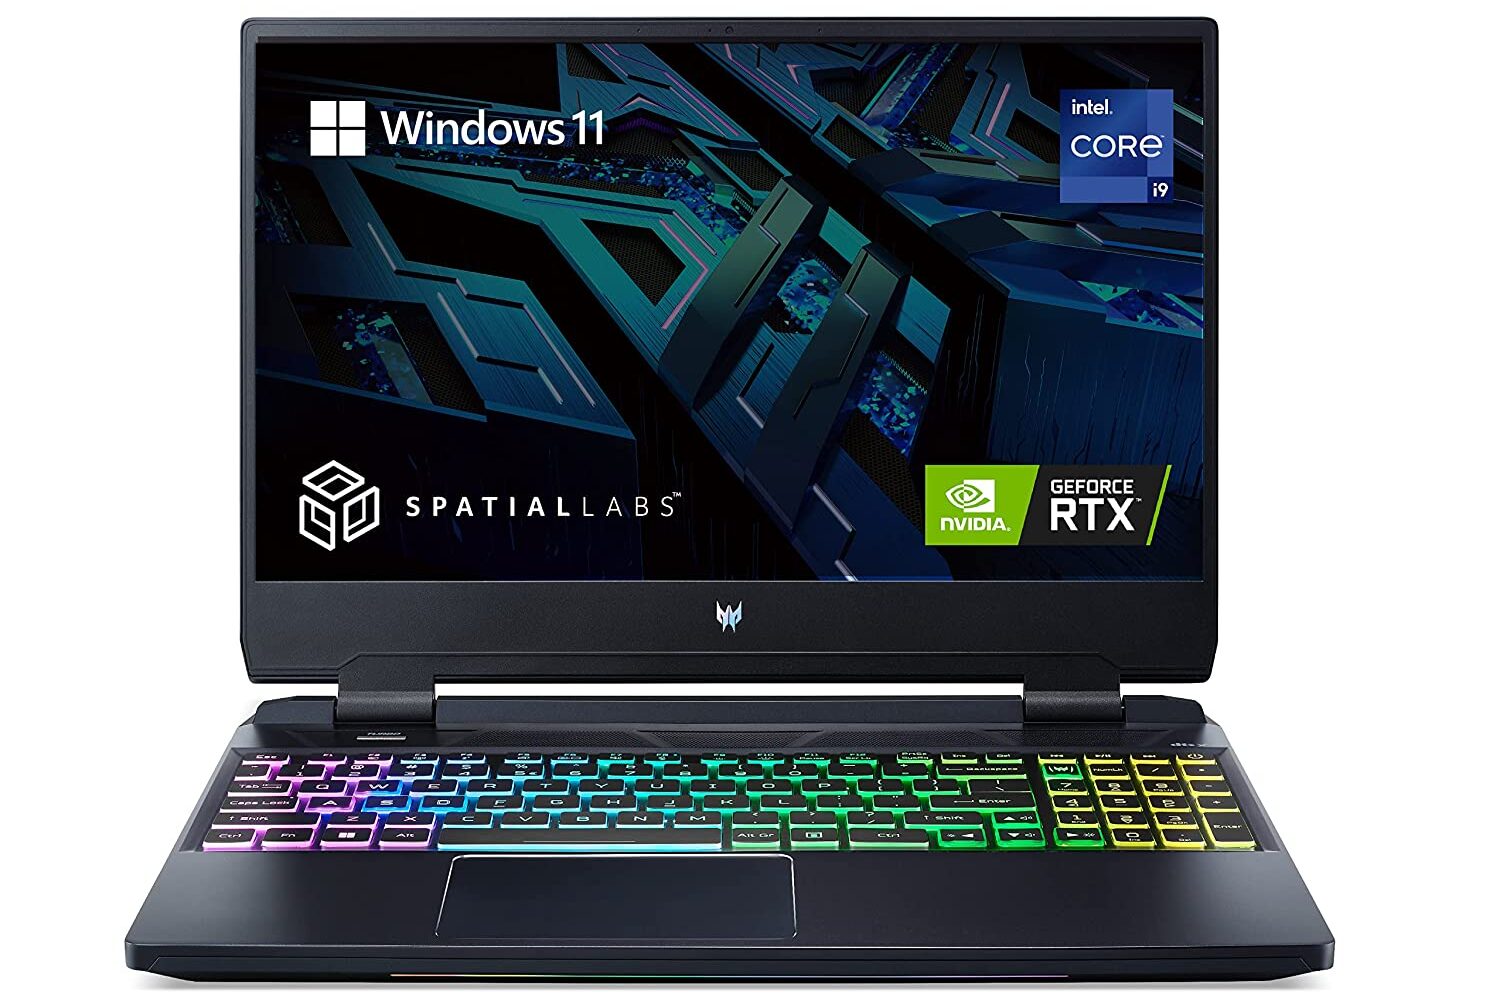 Acer Predator Helios 300 Gaming Laptop Intel Core i9 12th Gen-(Windows 11 Home/32 GB/2 TB SSD/ NVIDIA RTX 3080) PH315-55s with 39.6 cm (15.6 Inches)UHD IPS Display, 3 KG, Glasses-Free Stereoscopic 3D